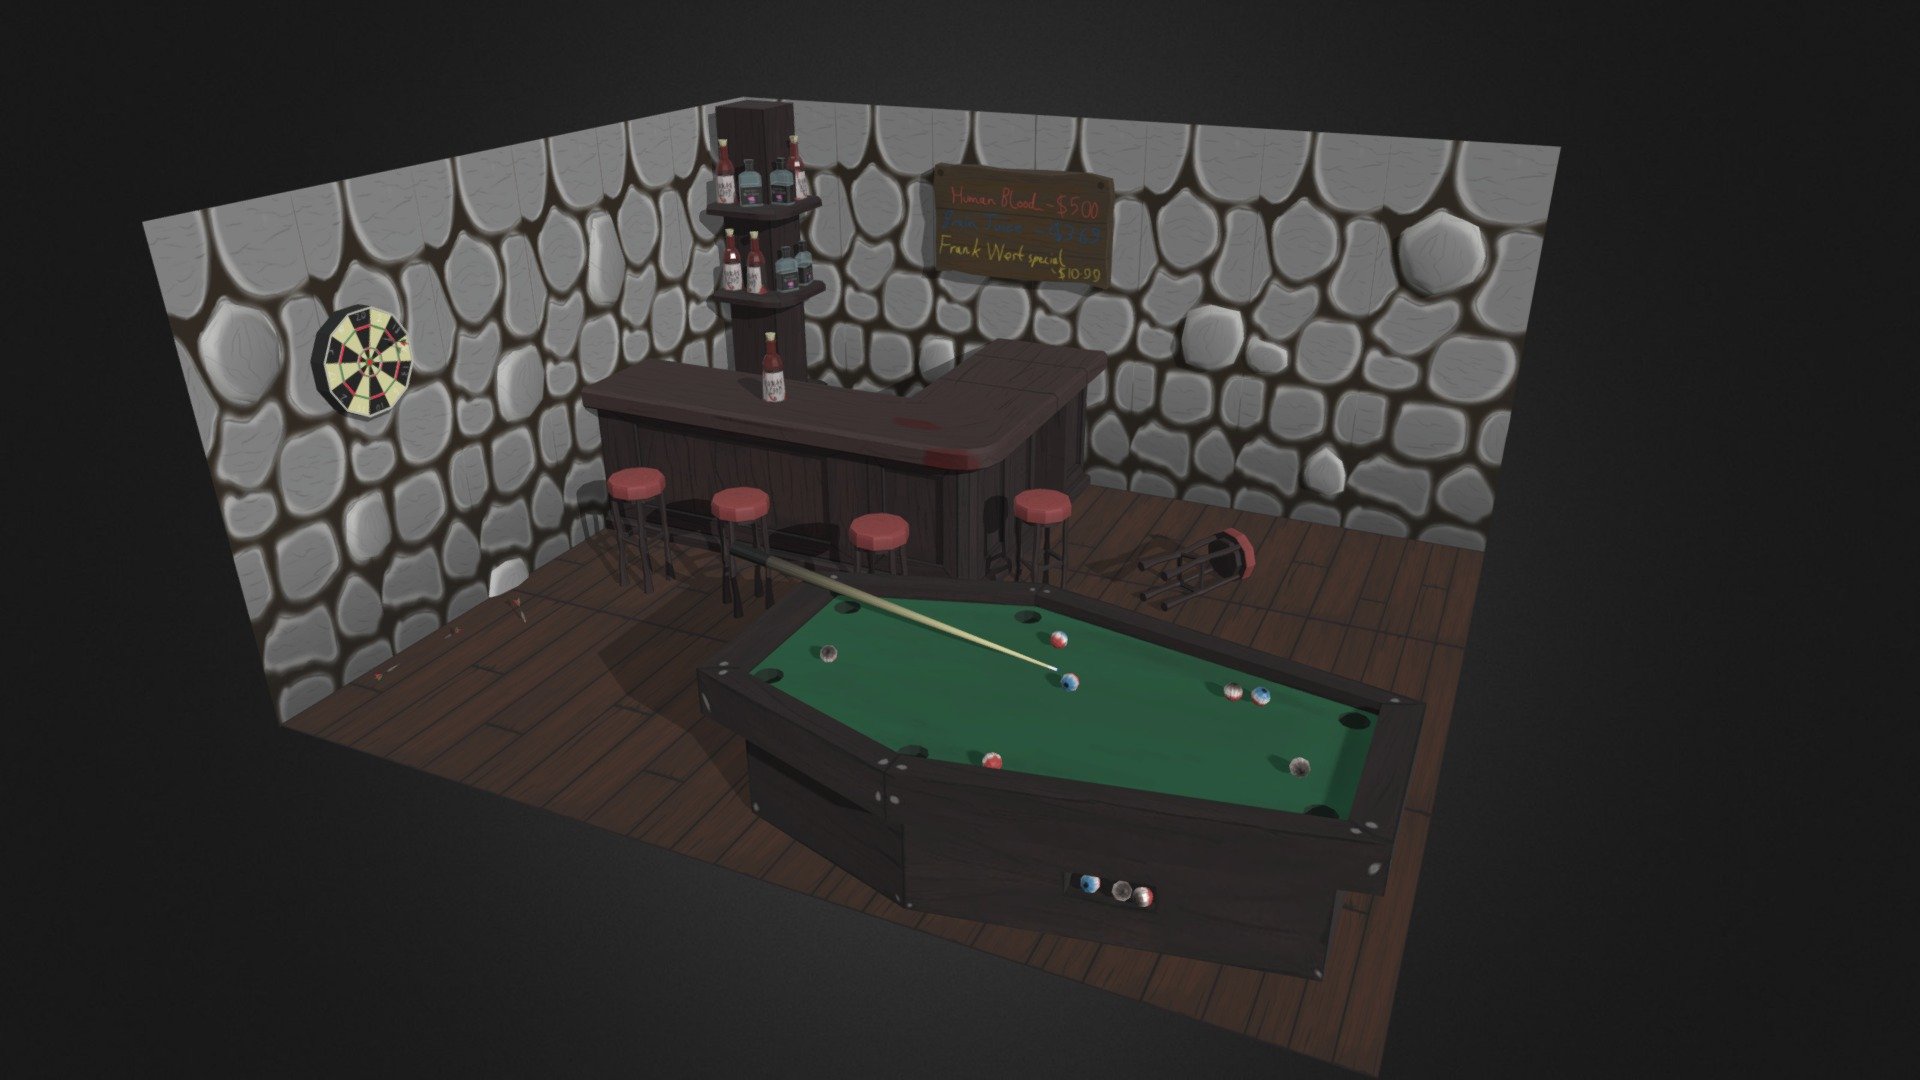 environment diorama of a bar that zombies like to meet and drink at. Model for my course
Assets include:
Floor boards
Stone walls
Stones
Bar
Barstools
Drinks board
Drinks stand
2 drinks
Dart board + darts
Coffin shaped pool table + cue + eyeballs - Zombie Bar V6 - 3D model by RyanKavanagh 3d model